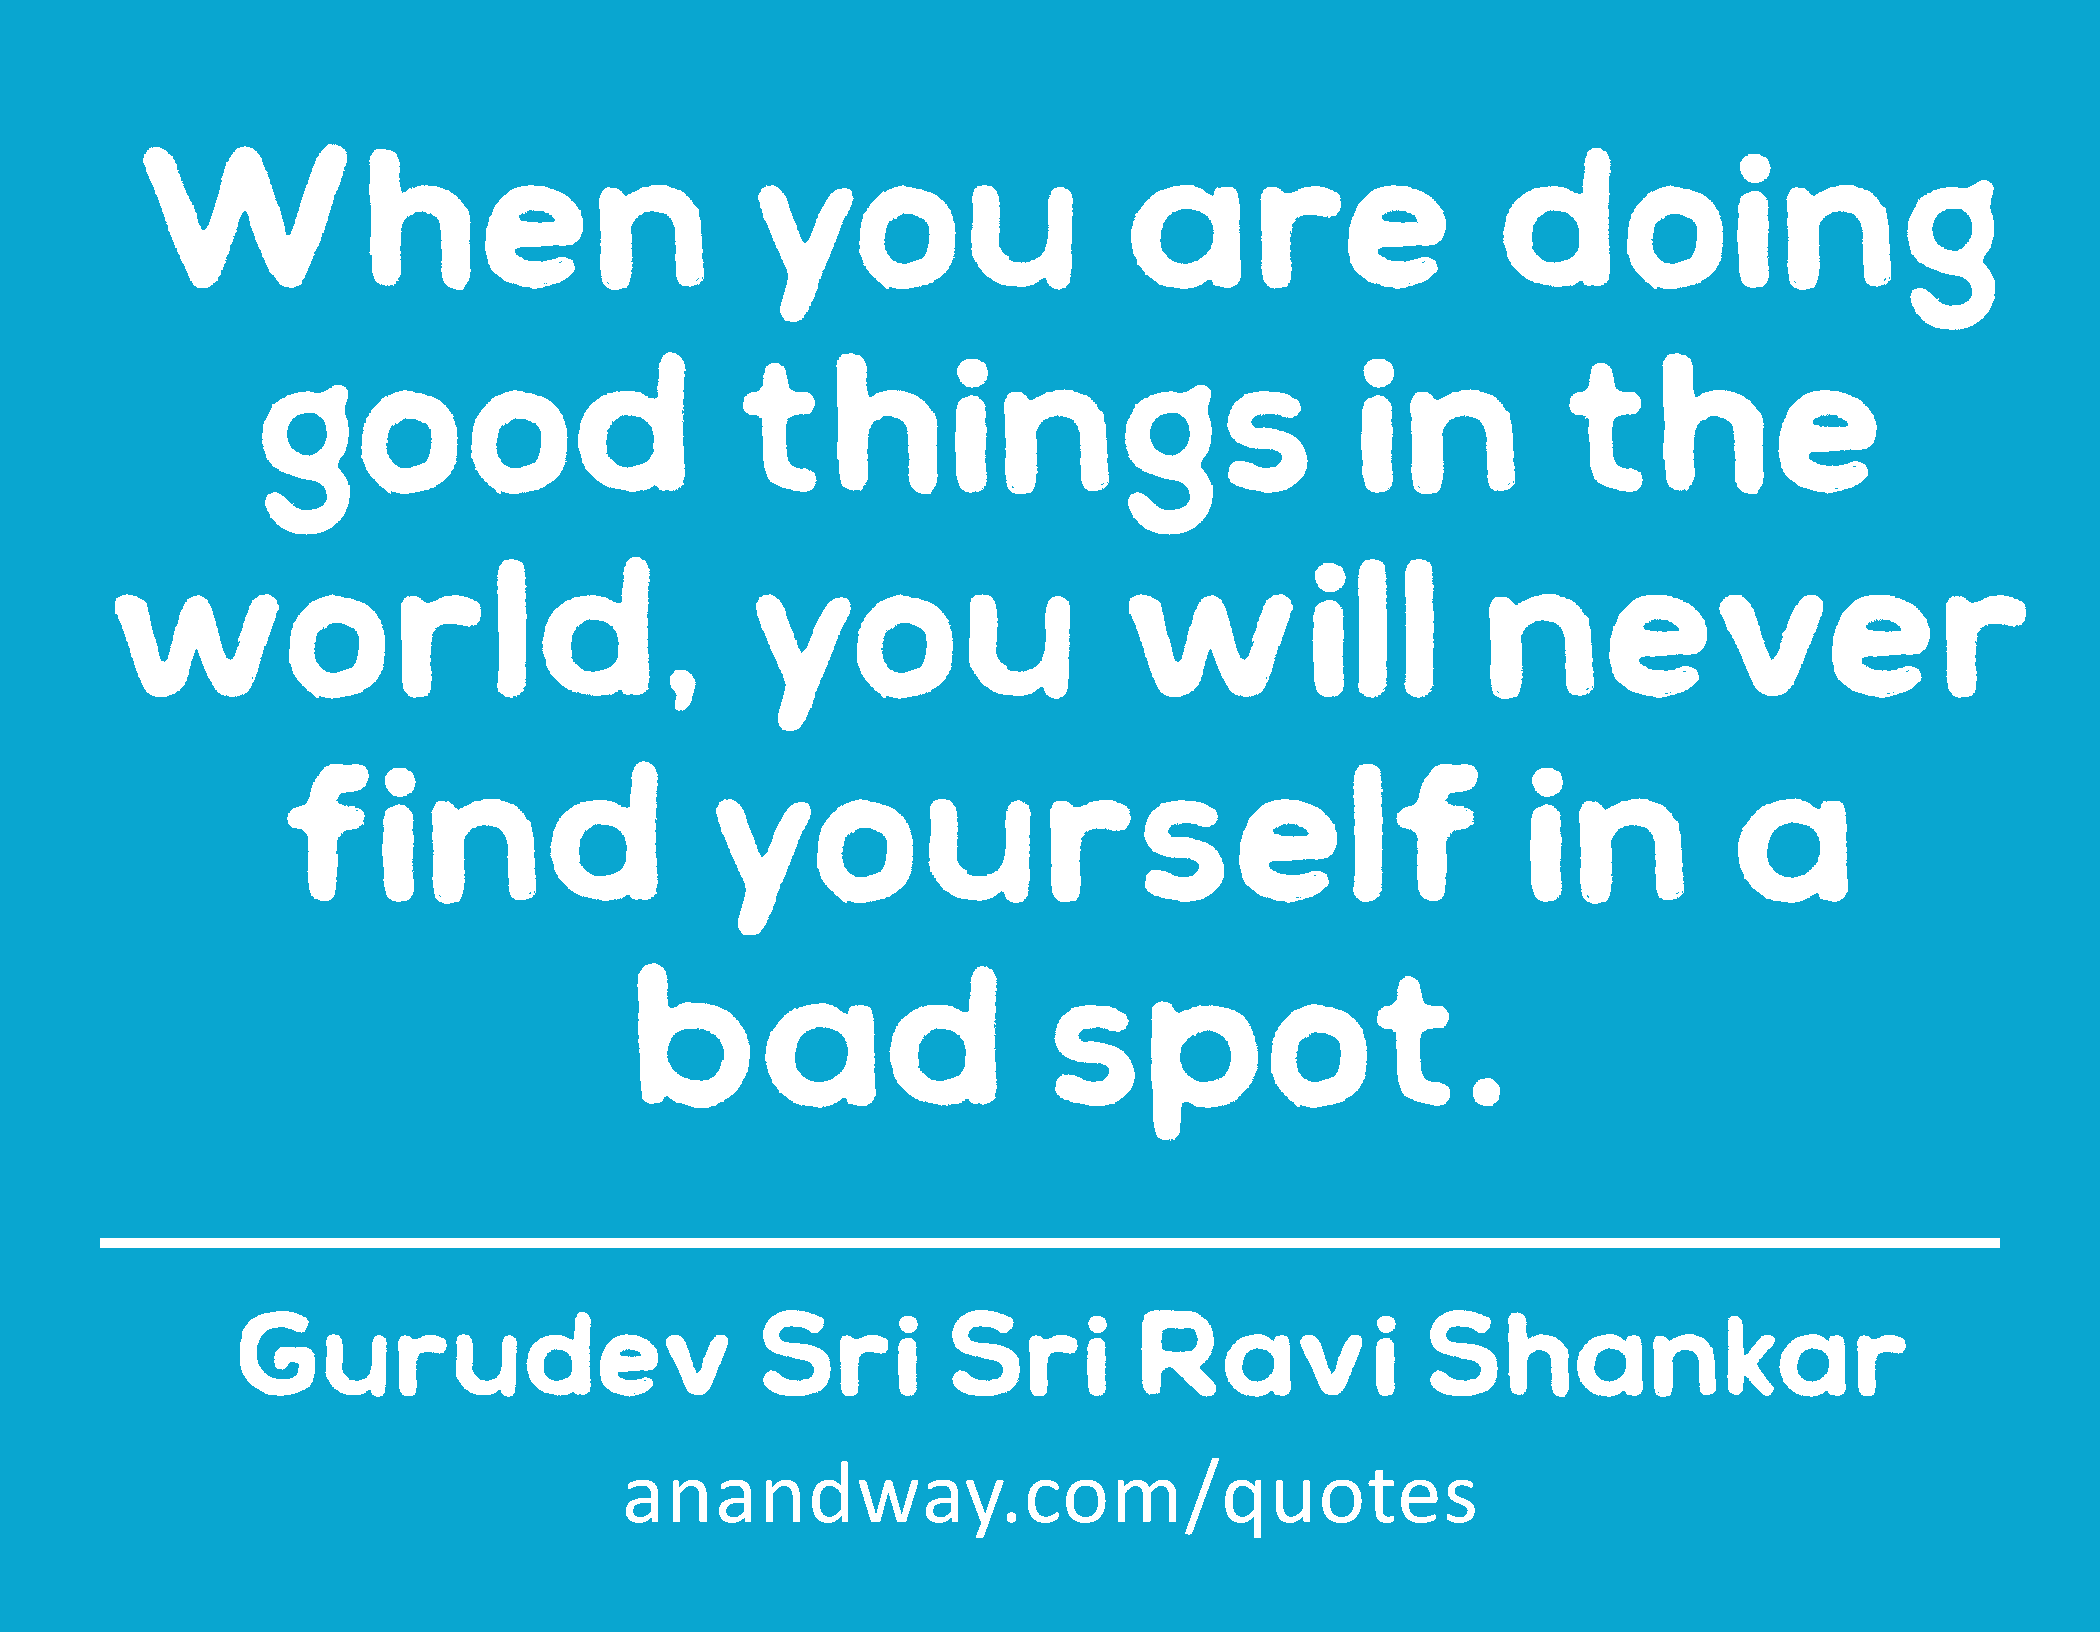 When you are doing good things in the world, you will never find yourself in a bad spot. 
 -Gurudev Sri Sri Ravi Shankar